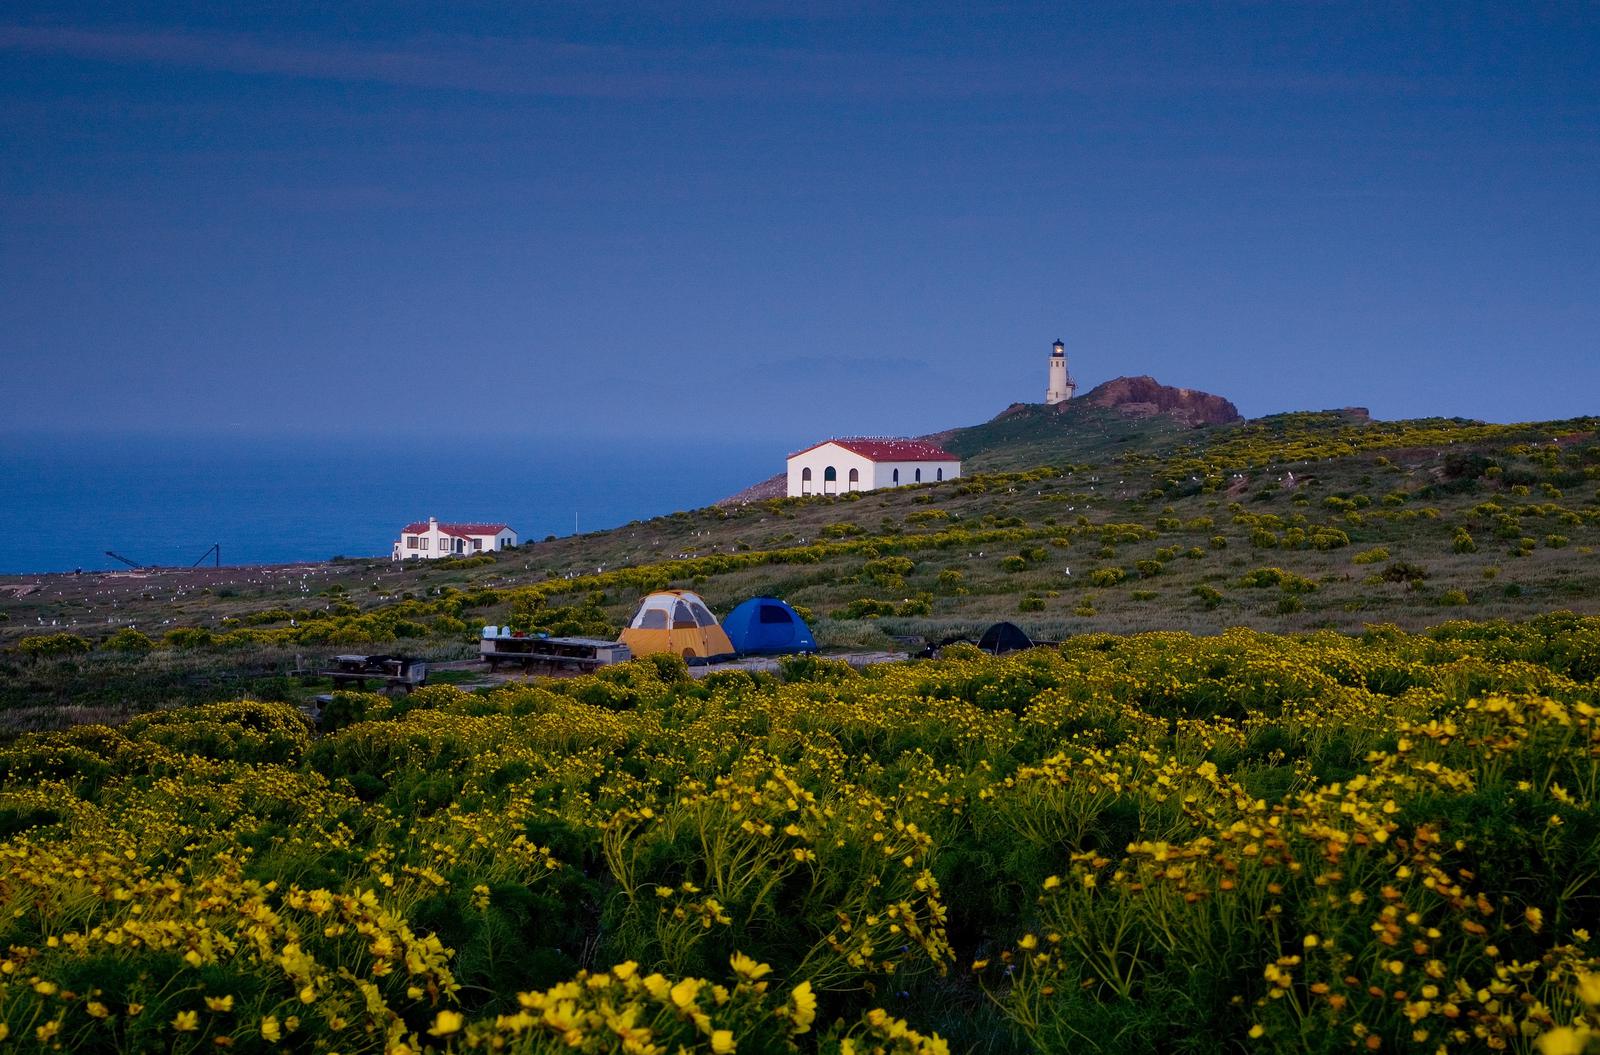 Two tents on terrace overlooking ocean, two buildings, and lighthouse.Anacapa Island